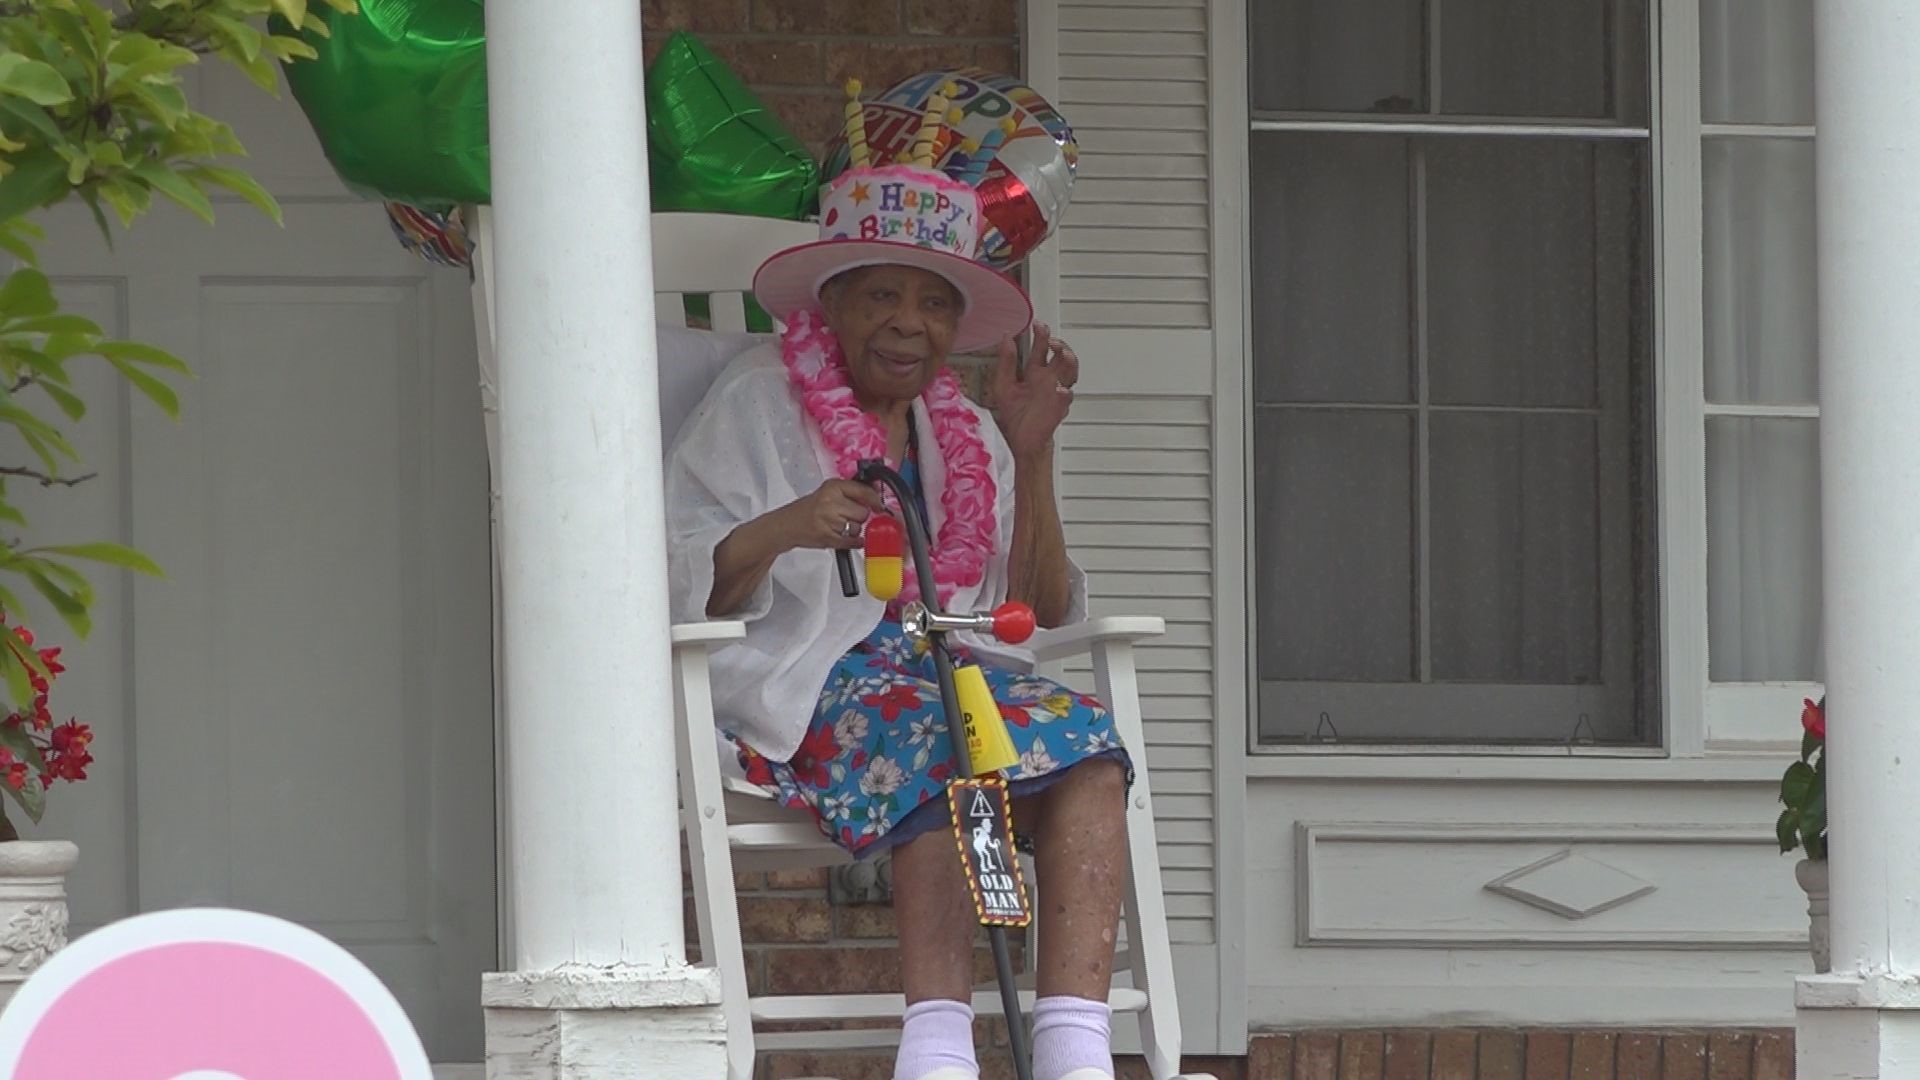 Ms. Inez Smith of Cayce, SC was surrounded by family and friends on her 104th birthday.